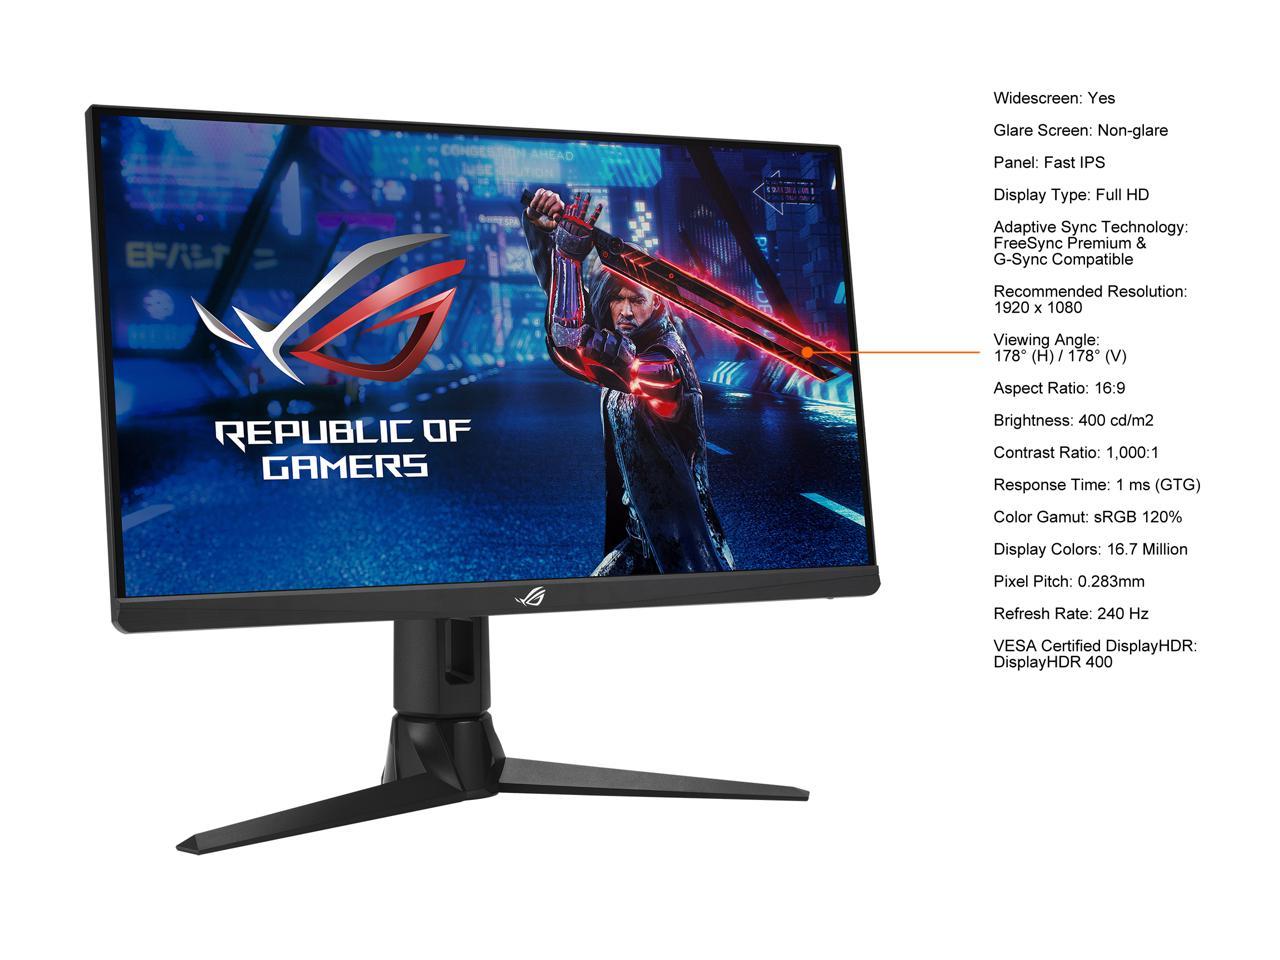 ASUS ROG Strix 24.5" 1080P HDR Gaming Monitor (XG259CM) - Full HD, Fast IPS, 240Hz, 1ms, Extreme Low Motion Blur Sync, G-Sync Compatible, KVM Support, Tripod Socket for Webcam, USB Type-C, DisplayPort